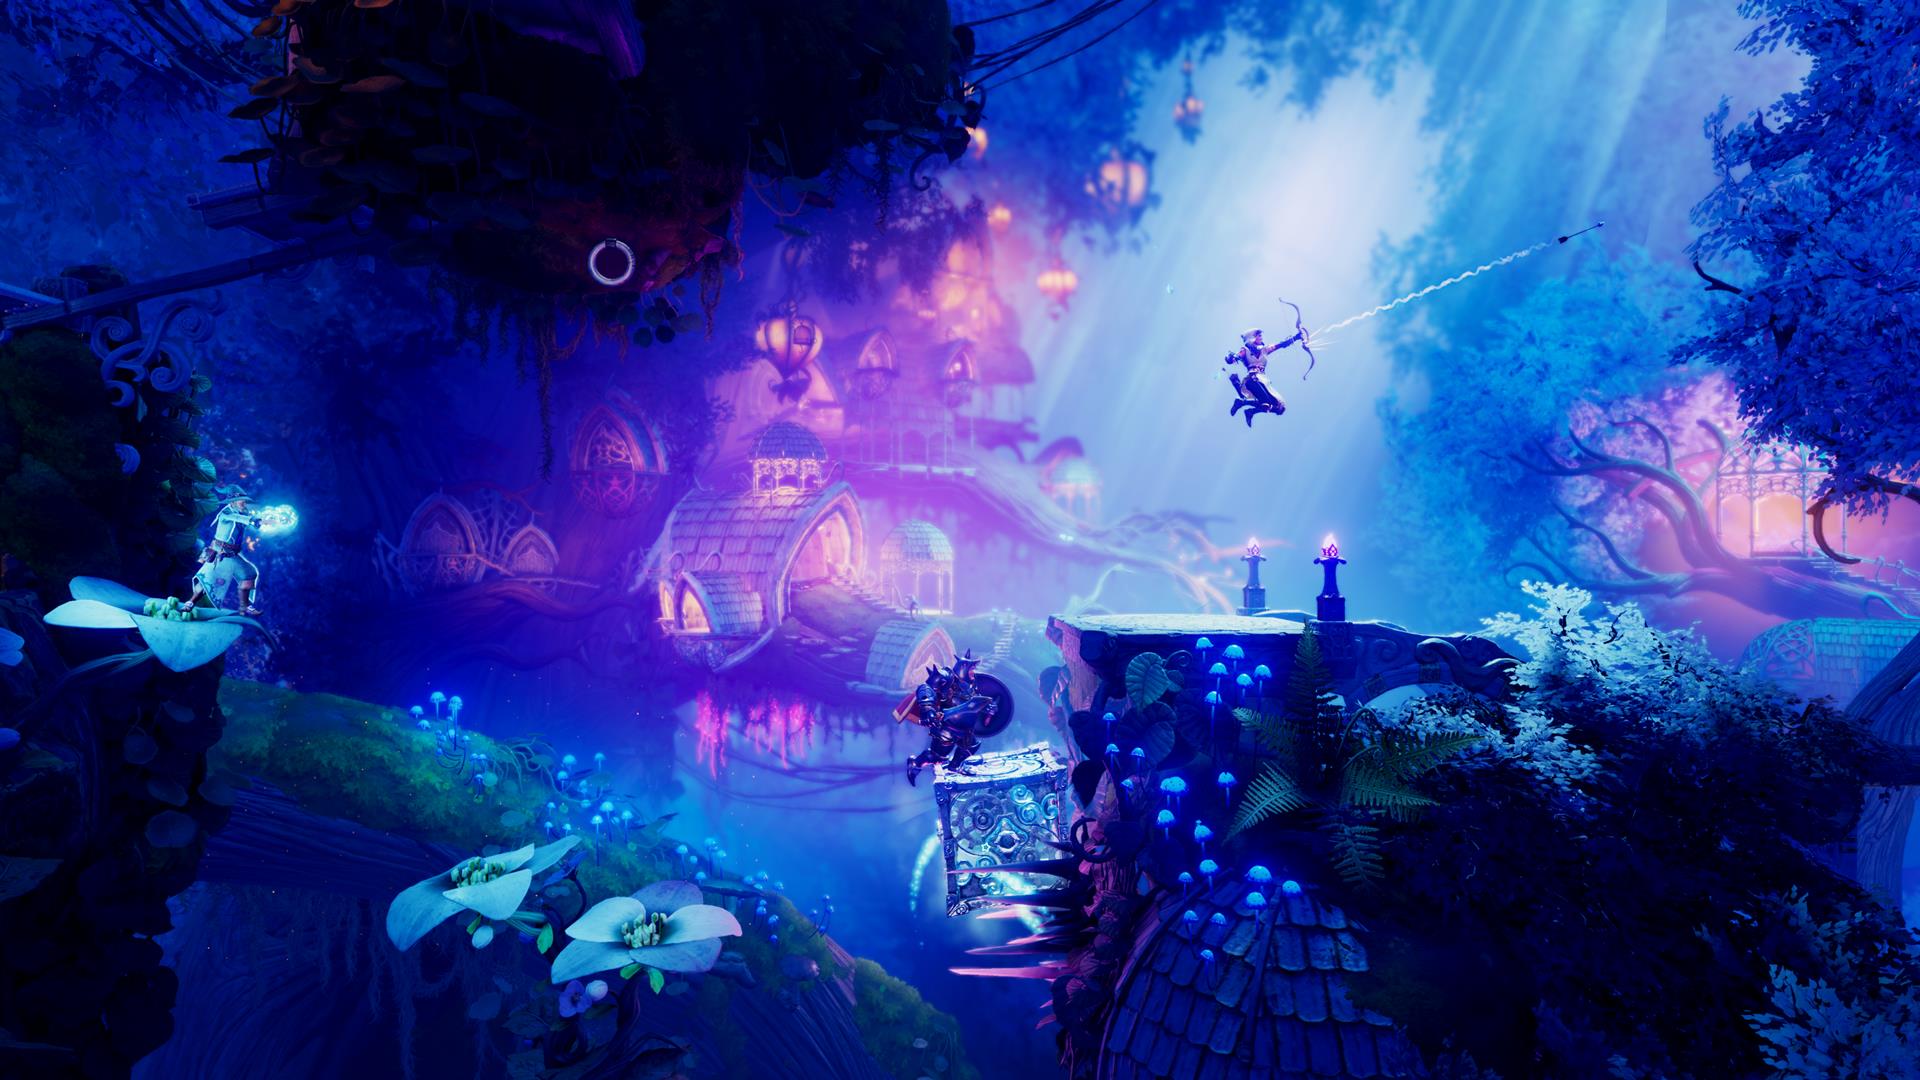 download free trine 2 ps4